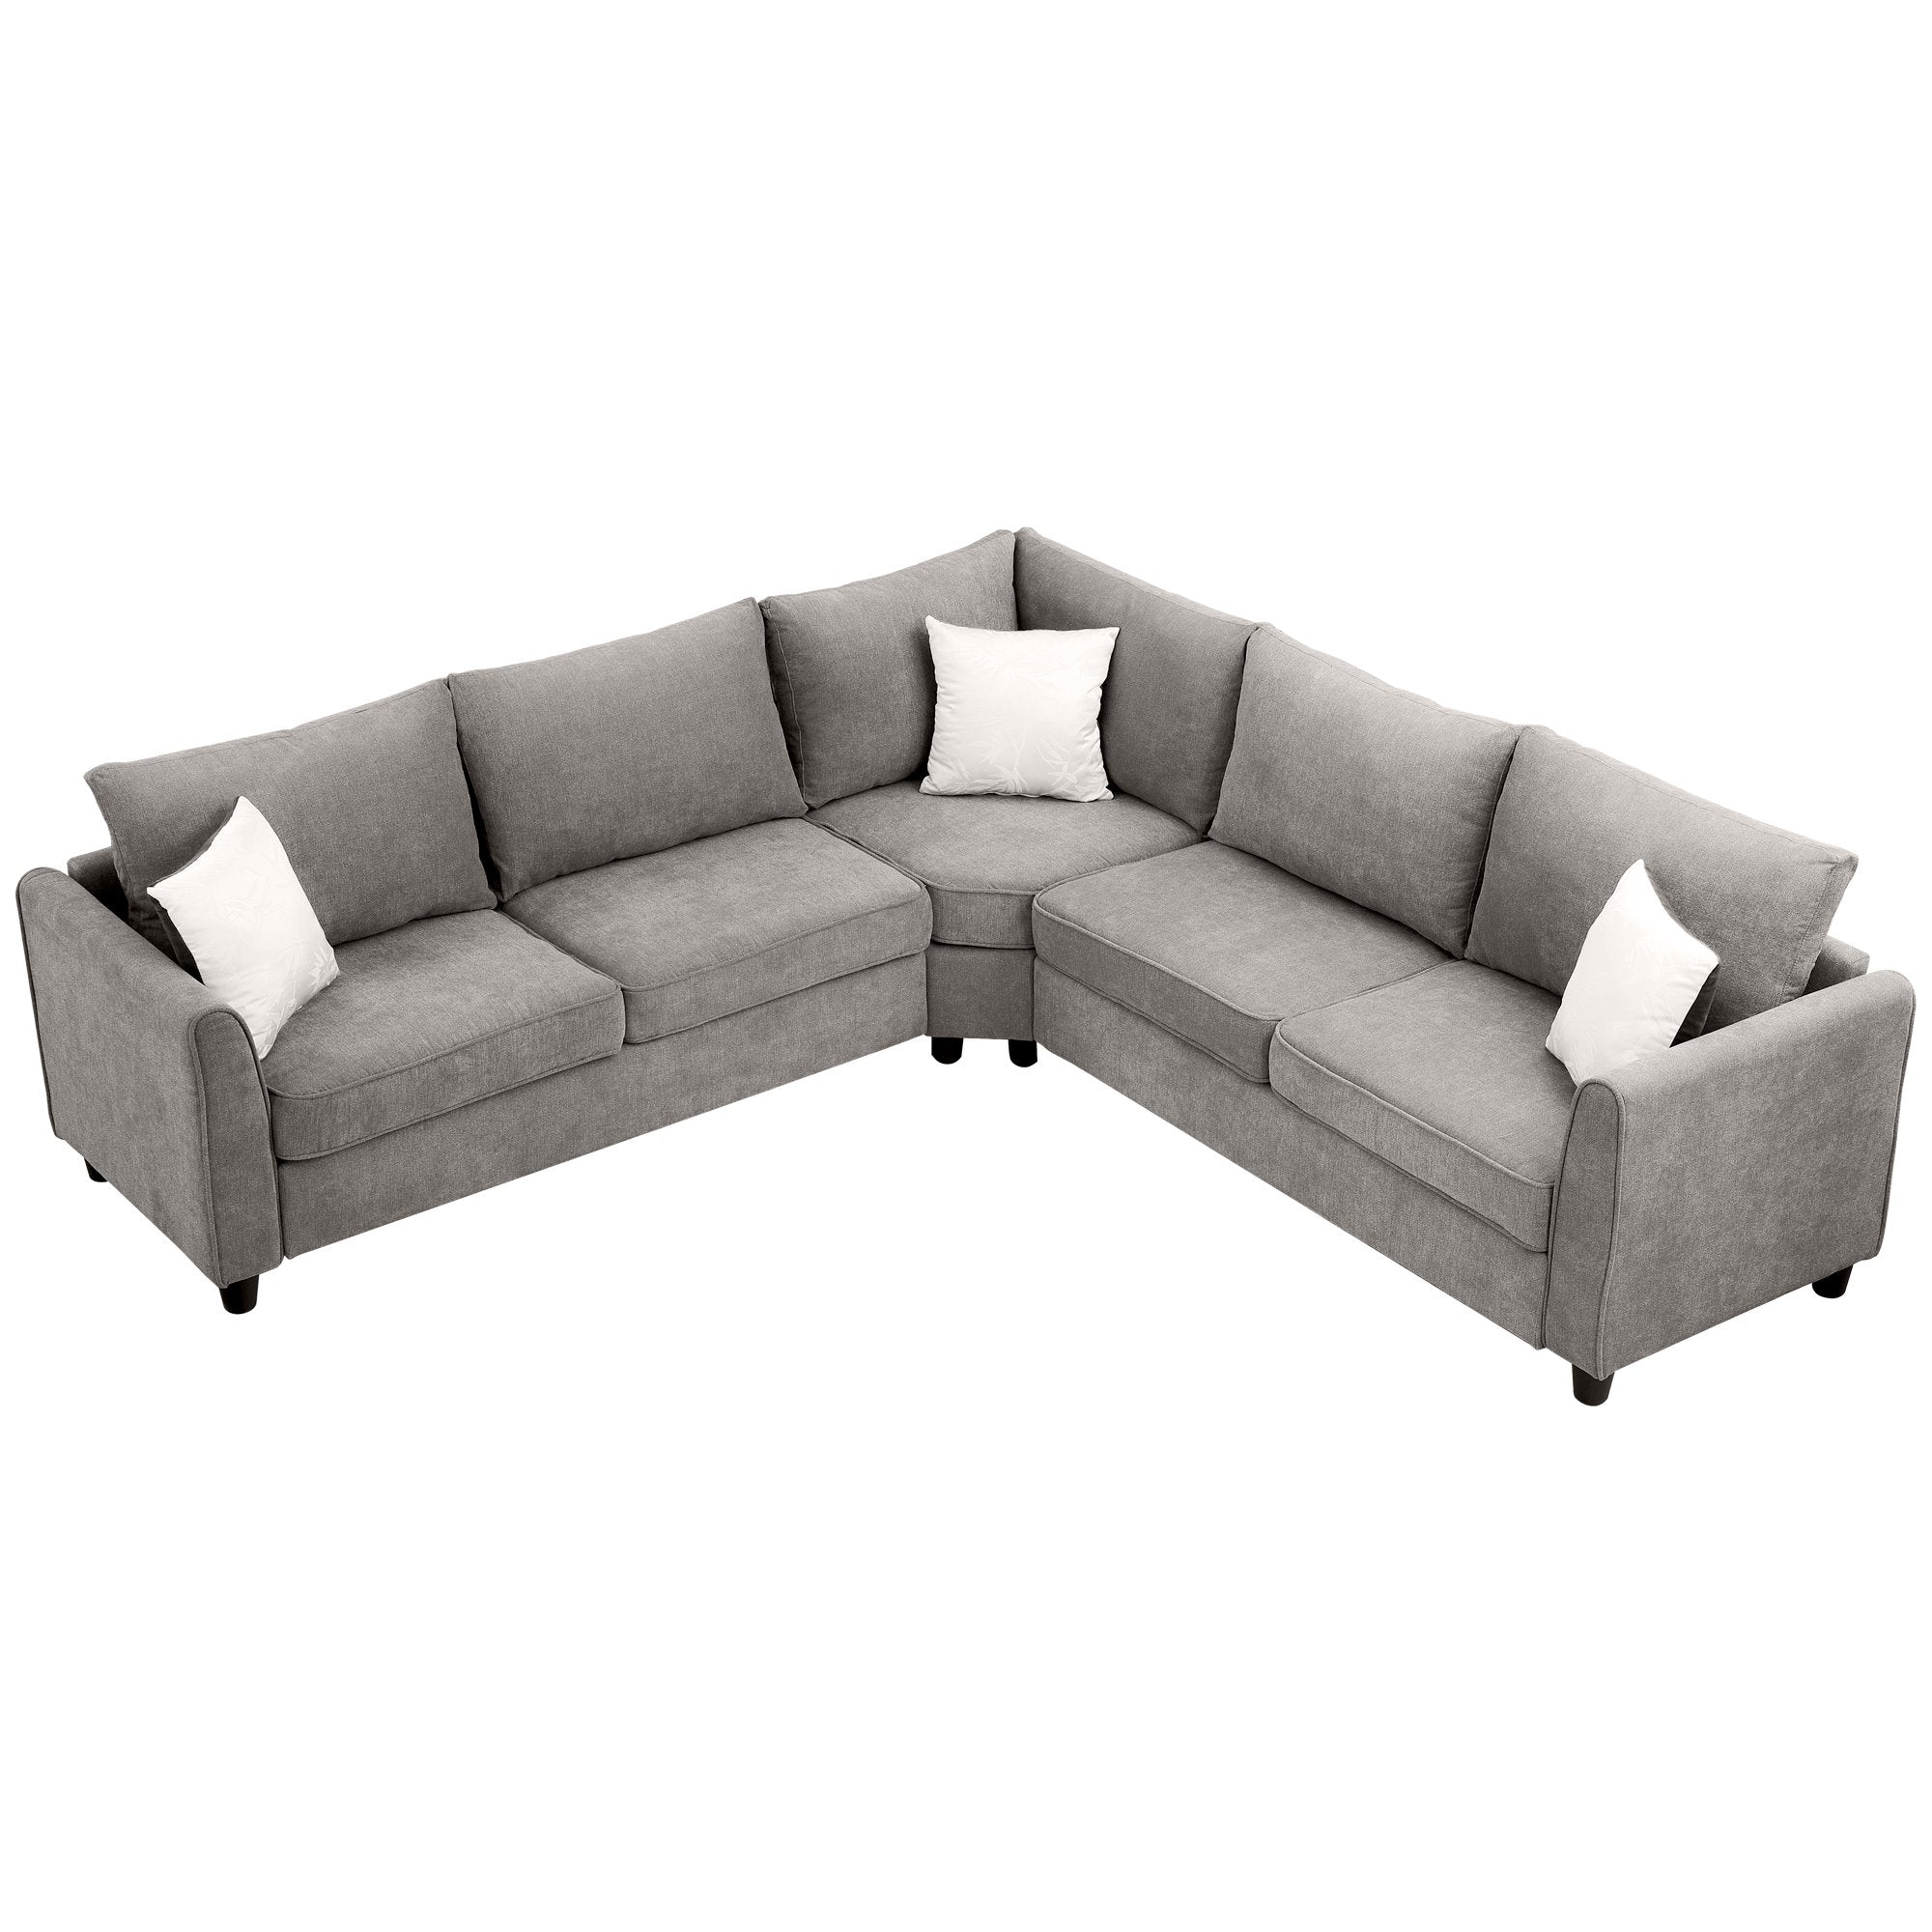 Big Sectional Sofa Couch L Shape Couch for Home Use Fabric Grey 3 Pillows Included-Boyel Living